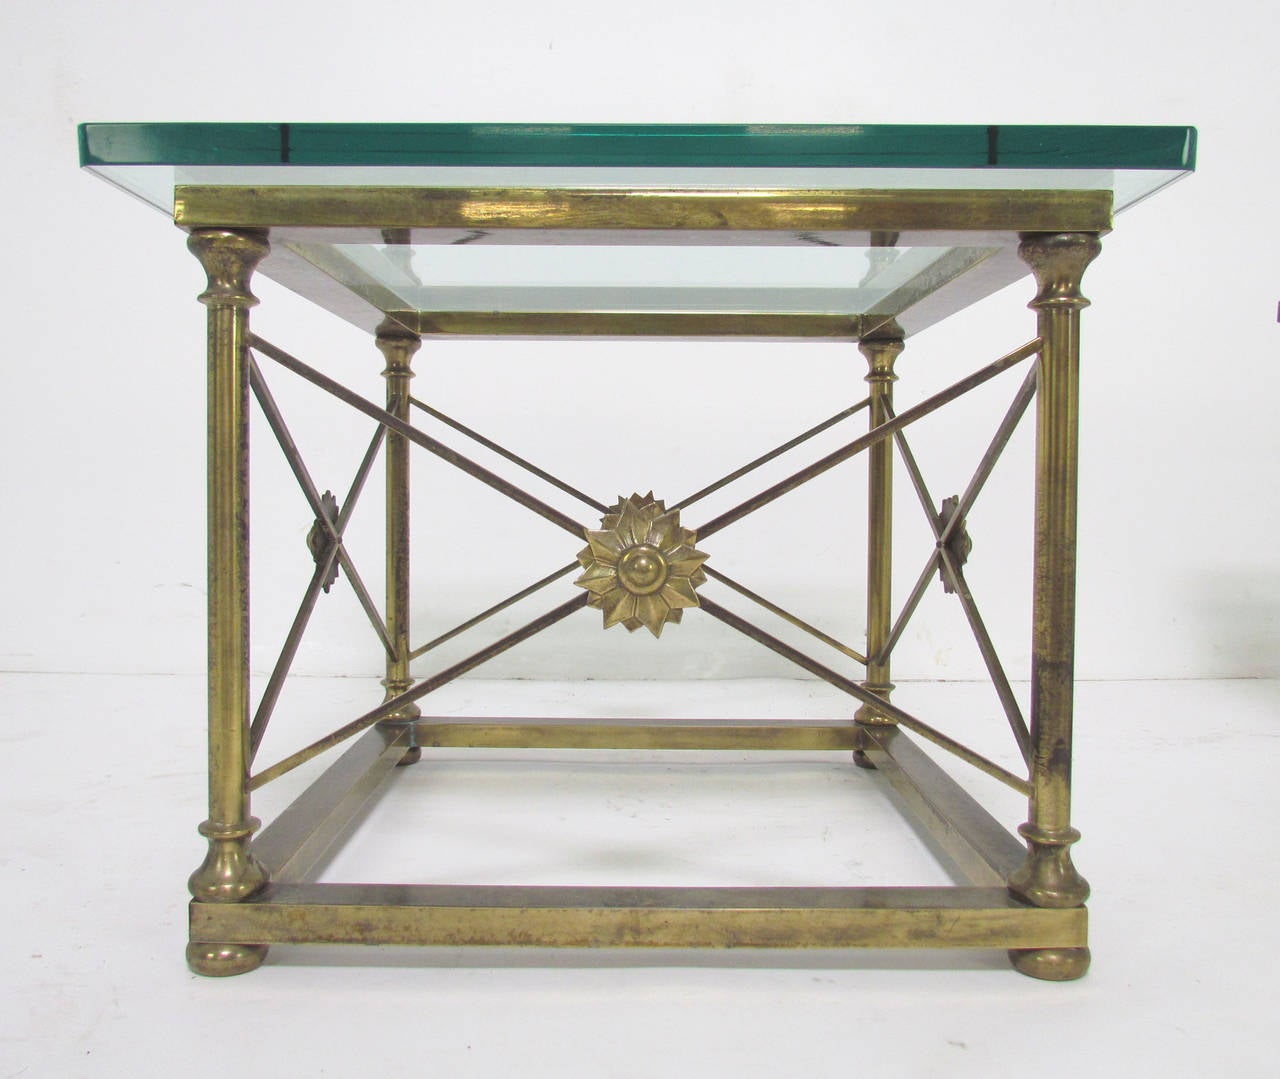 Pair of brass end tables by Mastercraft, made in Italy. Neoclassical-style medallions decorate all four sides. Lovely patina to the brass. Original 3/4